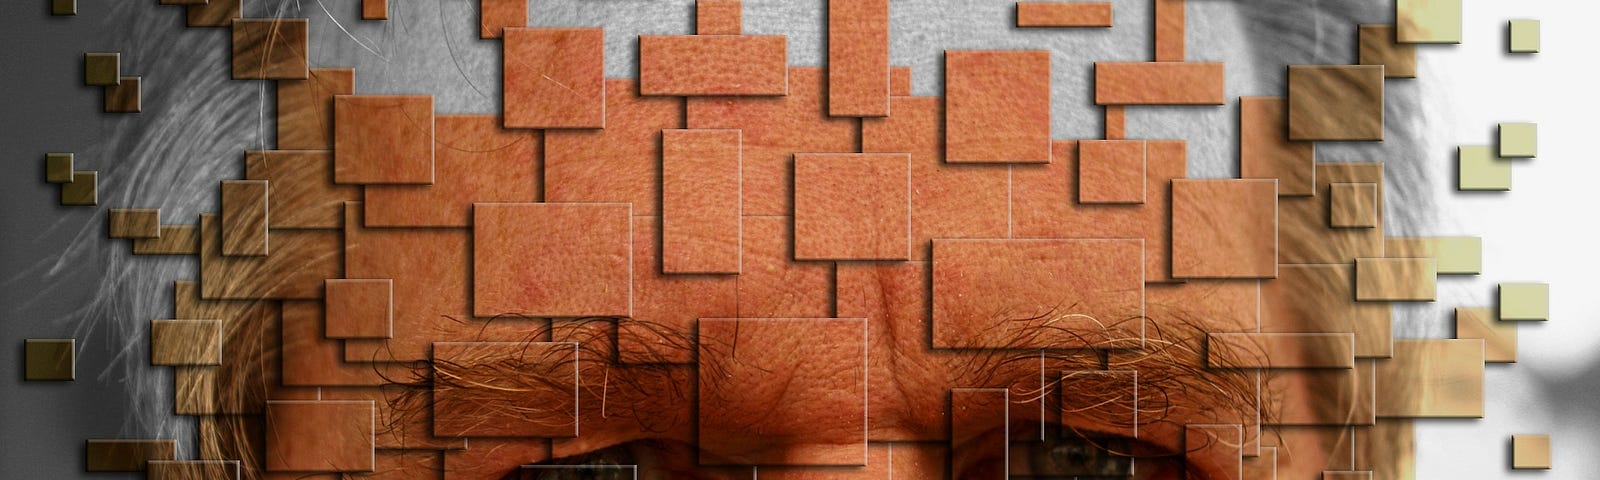 Image of man’s face with puzzle-like pieces superimposed over it